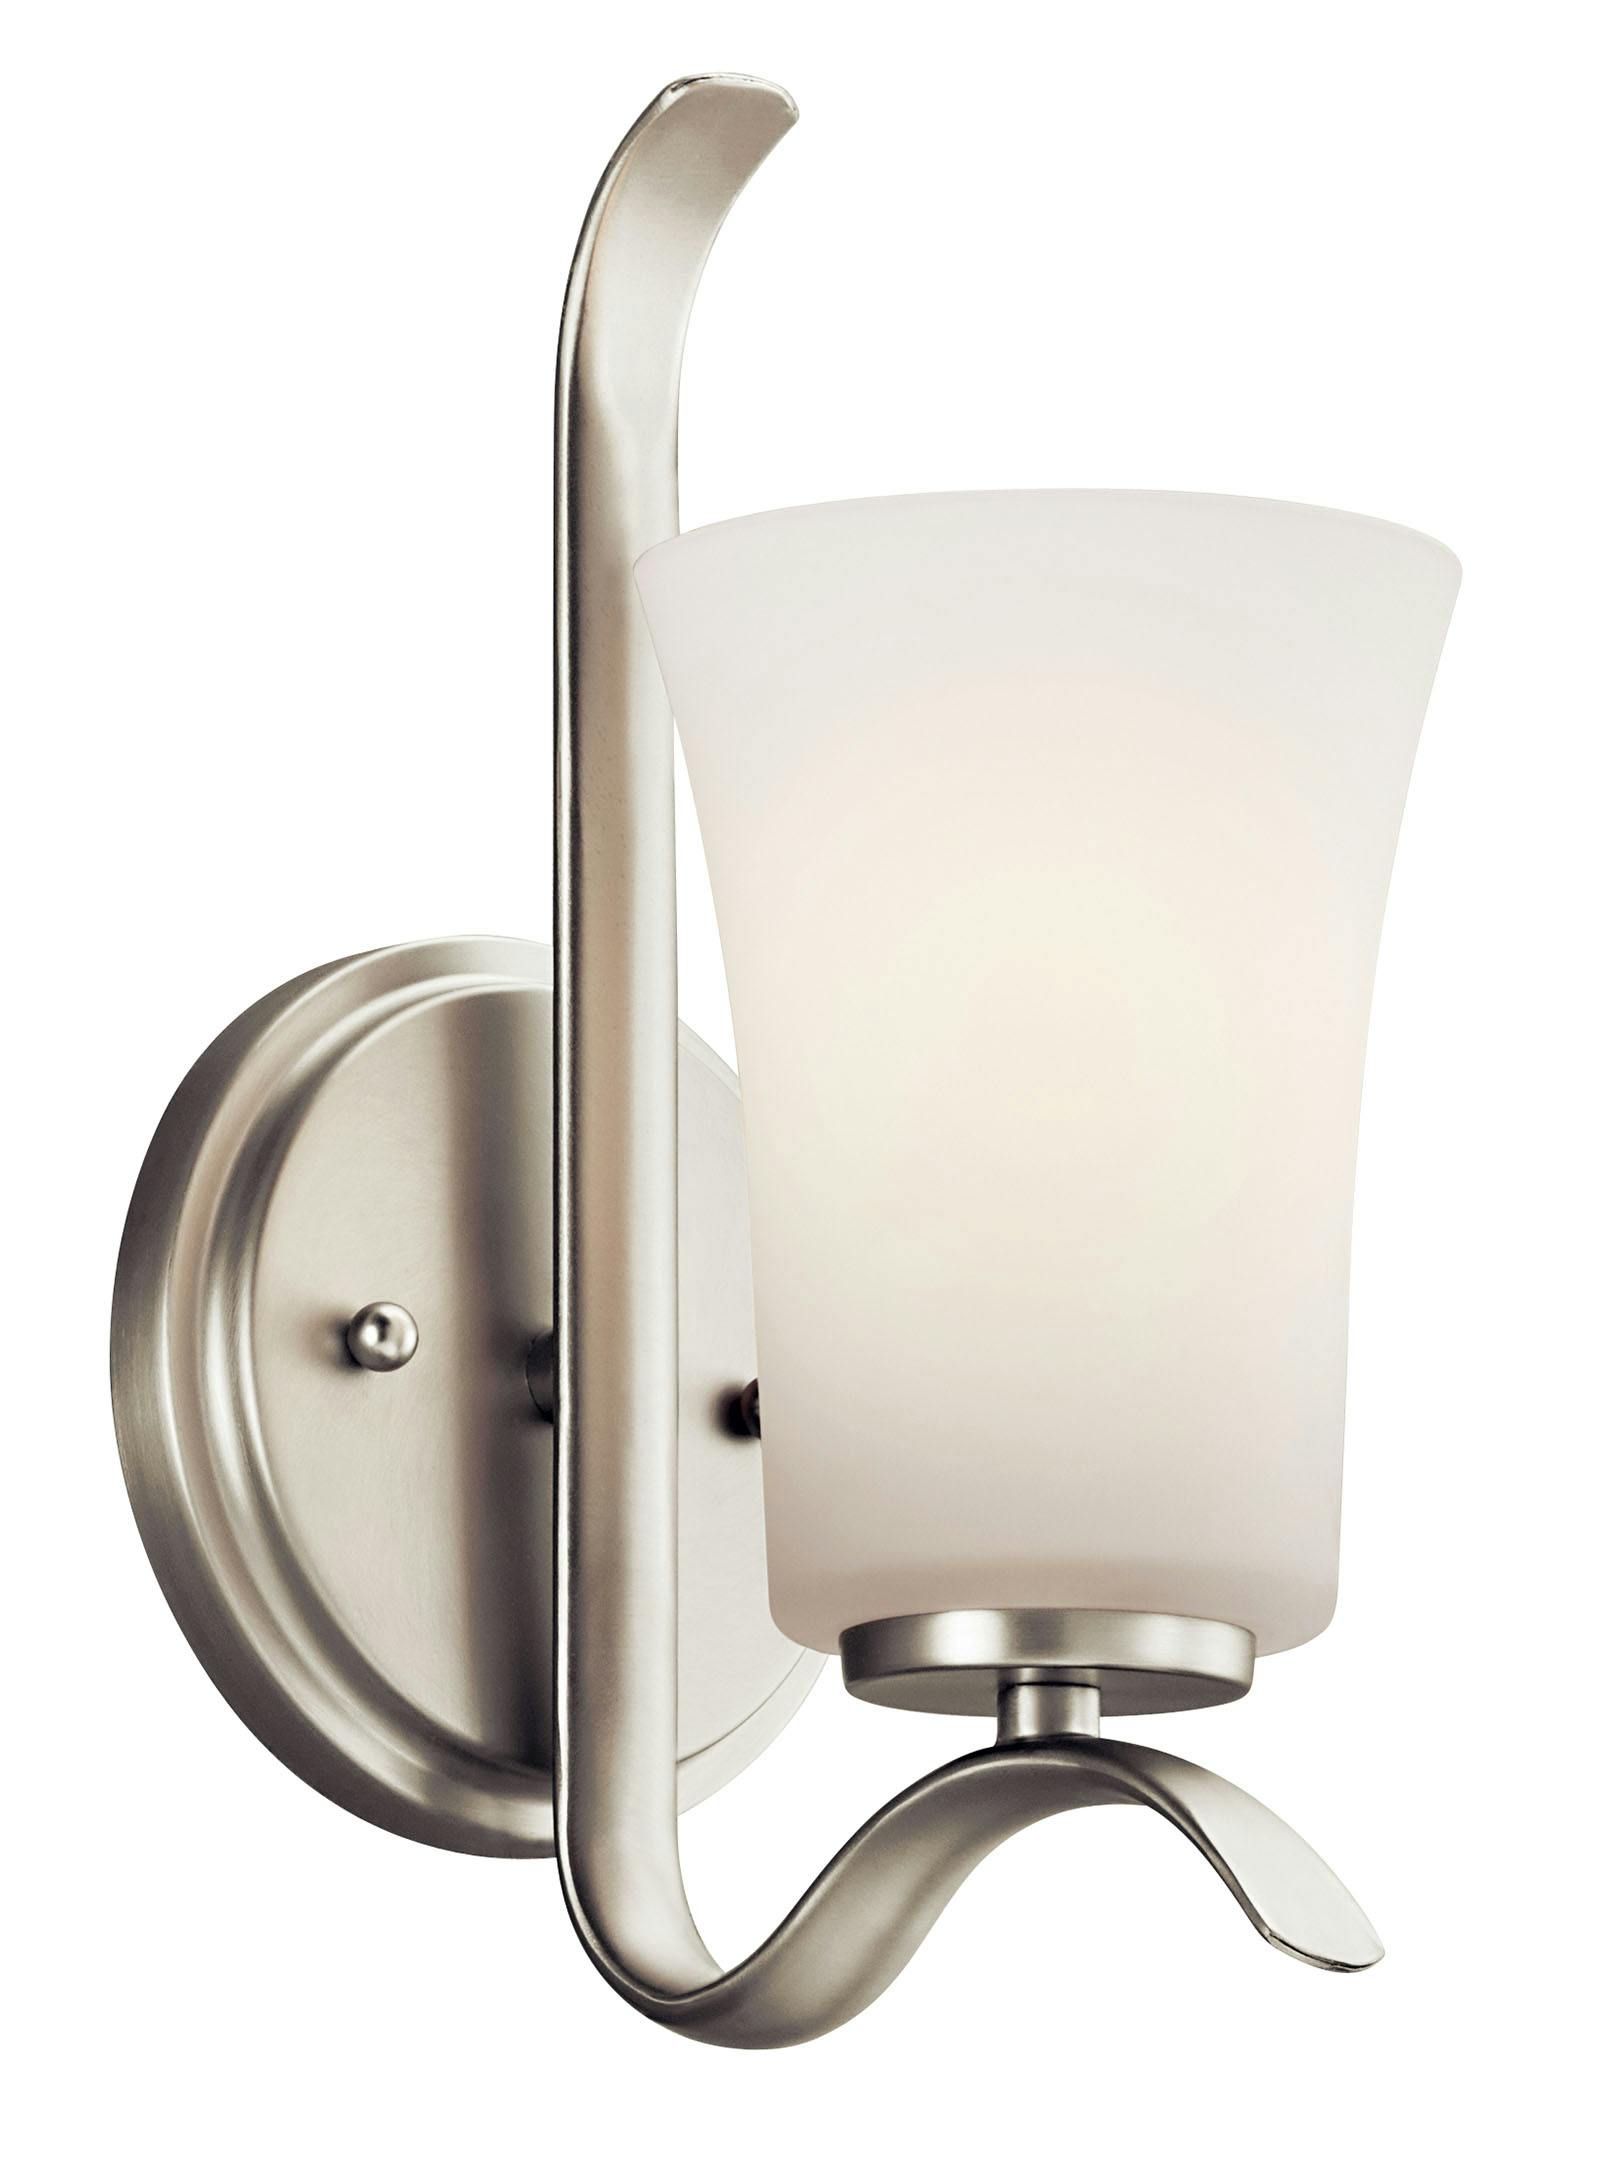 Armida 1 Light Wall Sconce Brushed Nickel on a white background